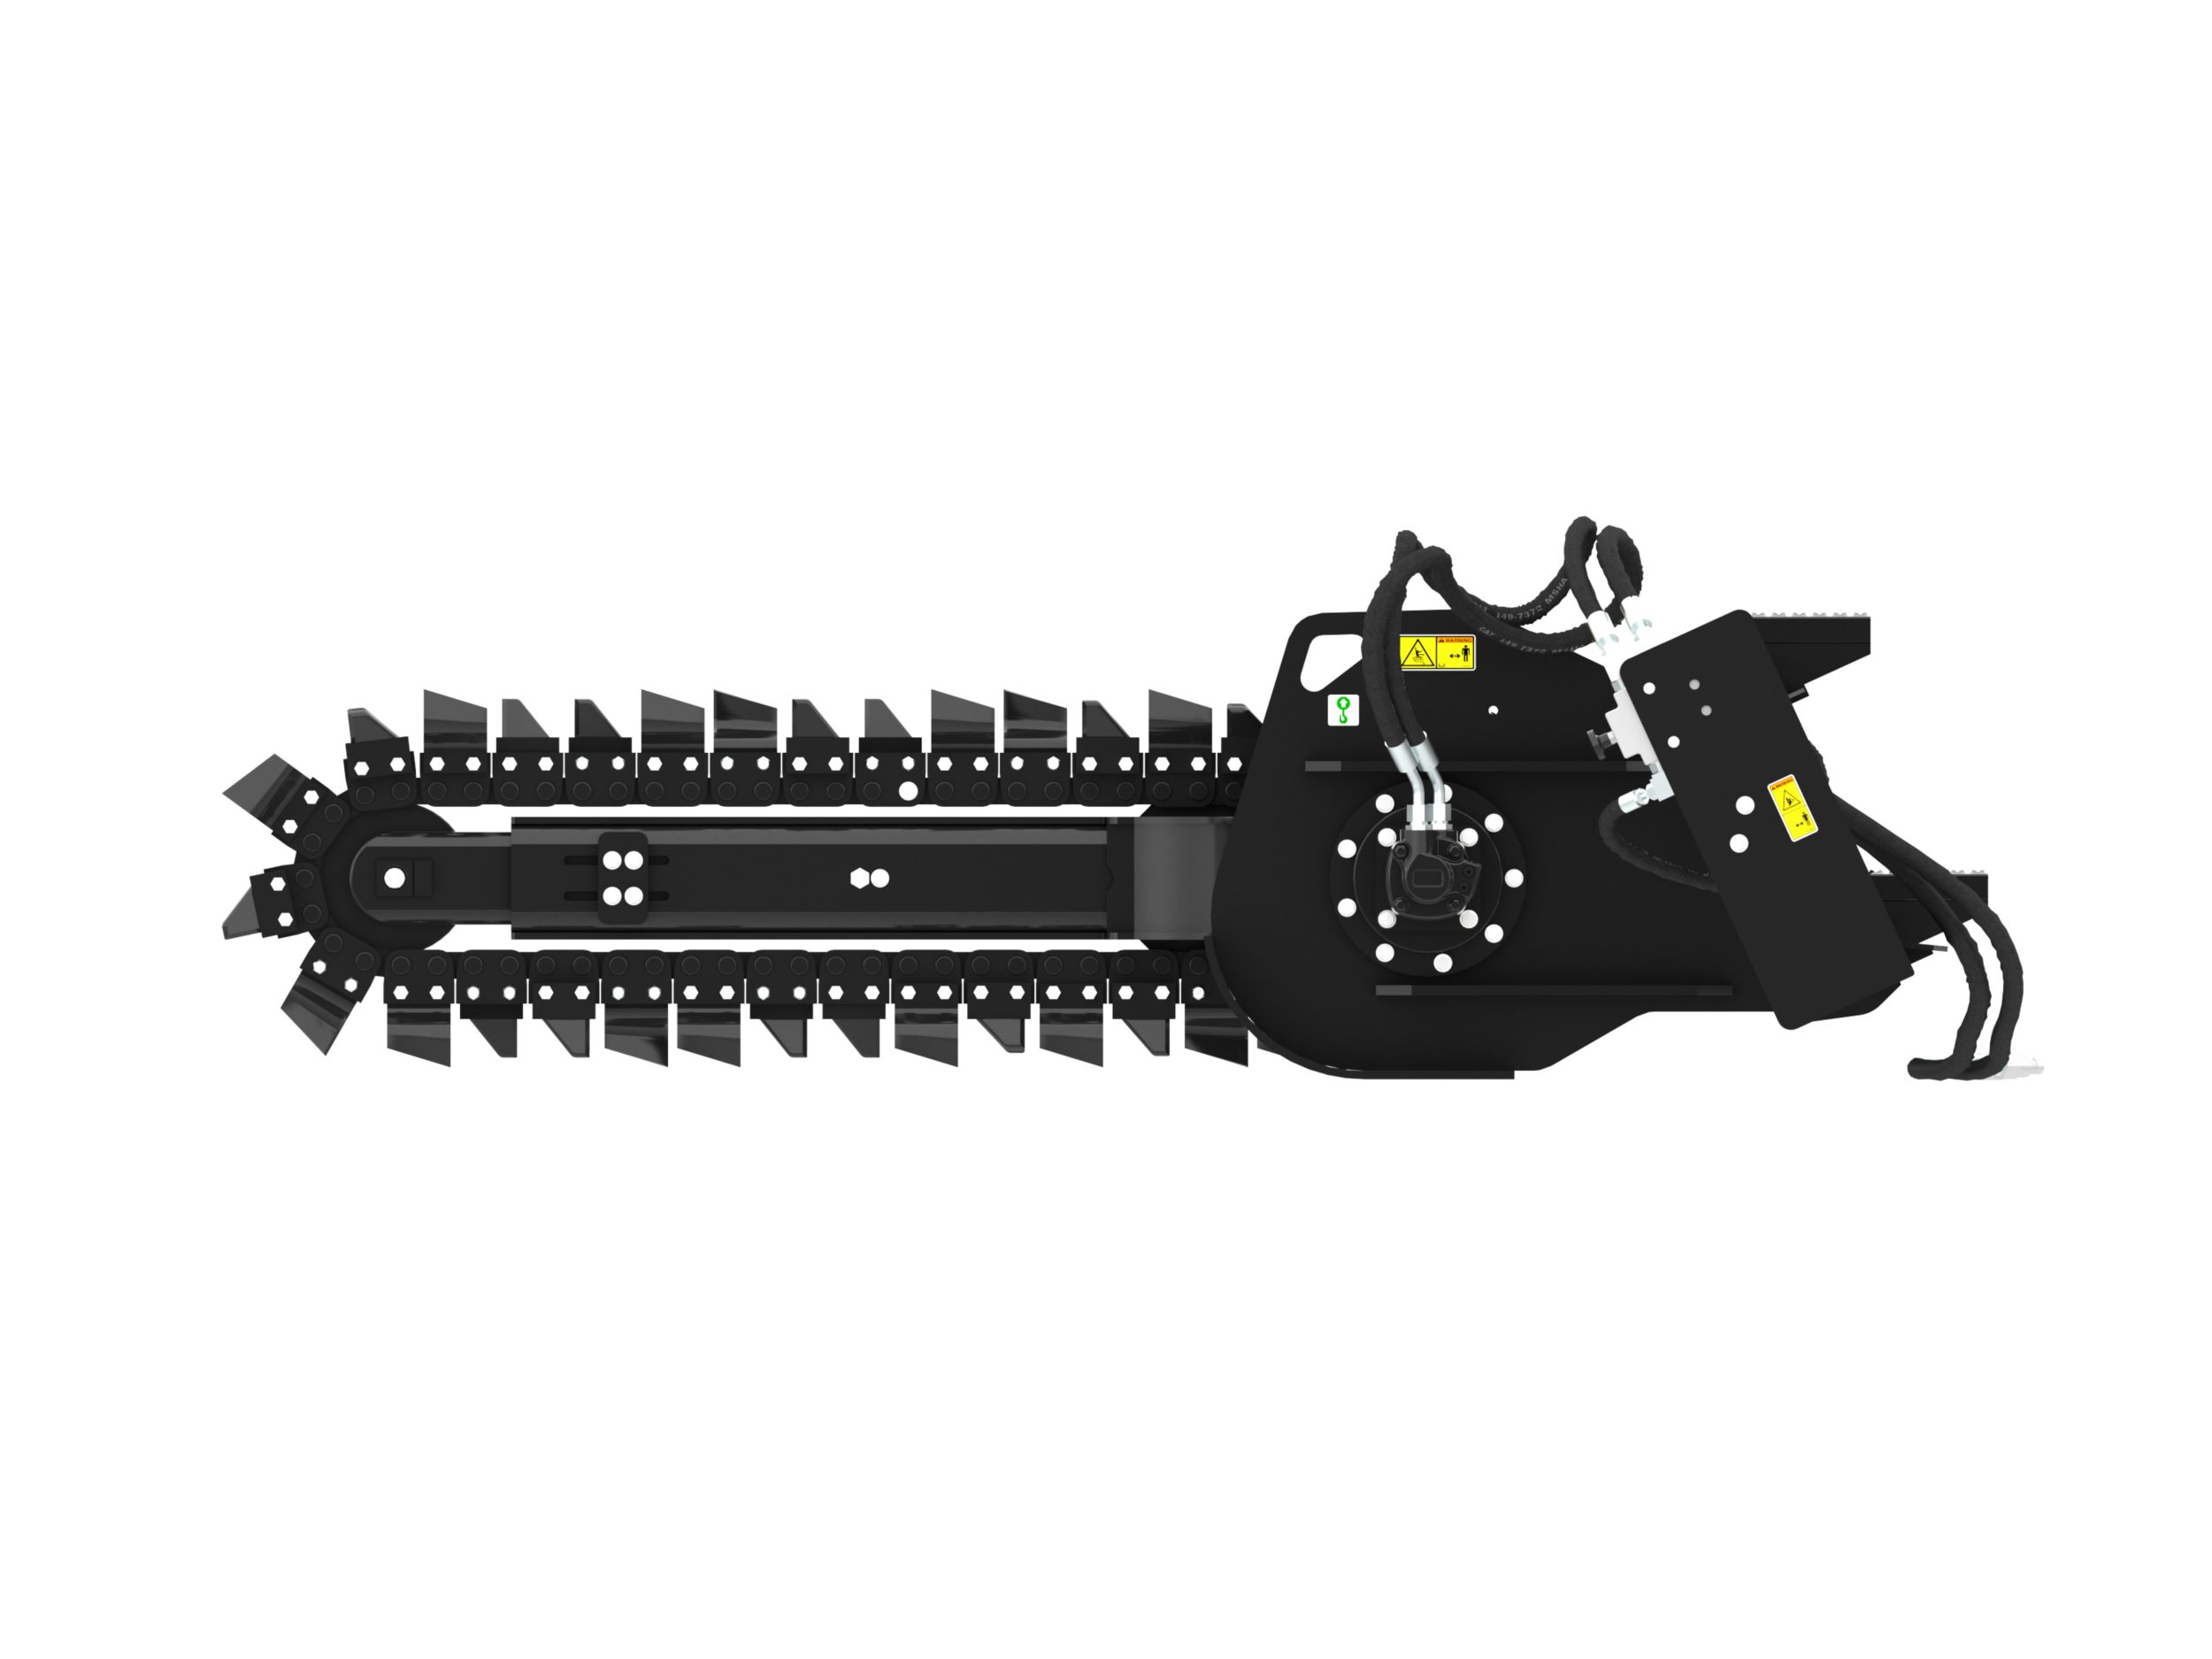 T112 Hydraulic Trencher with combo teeth